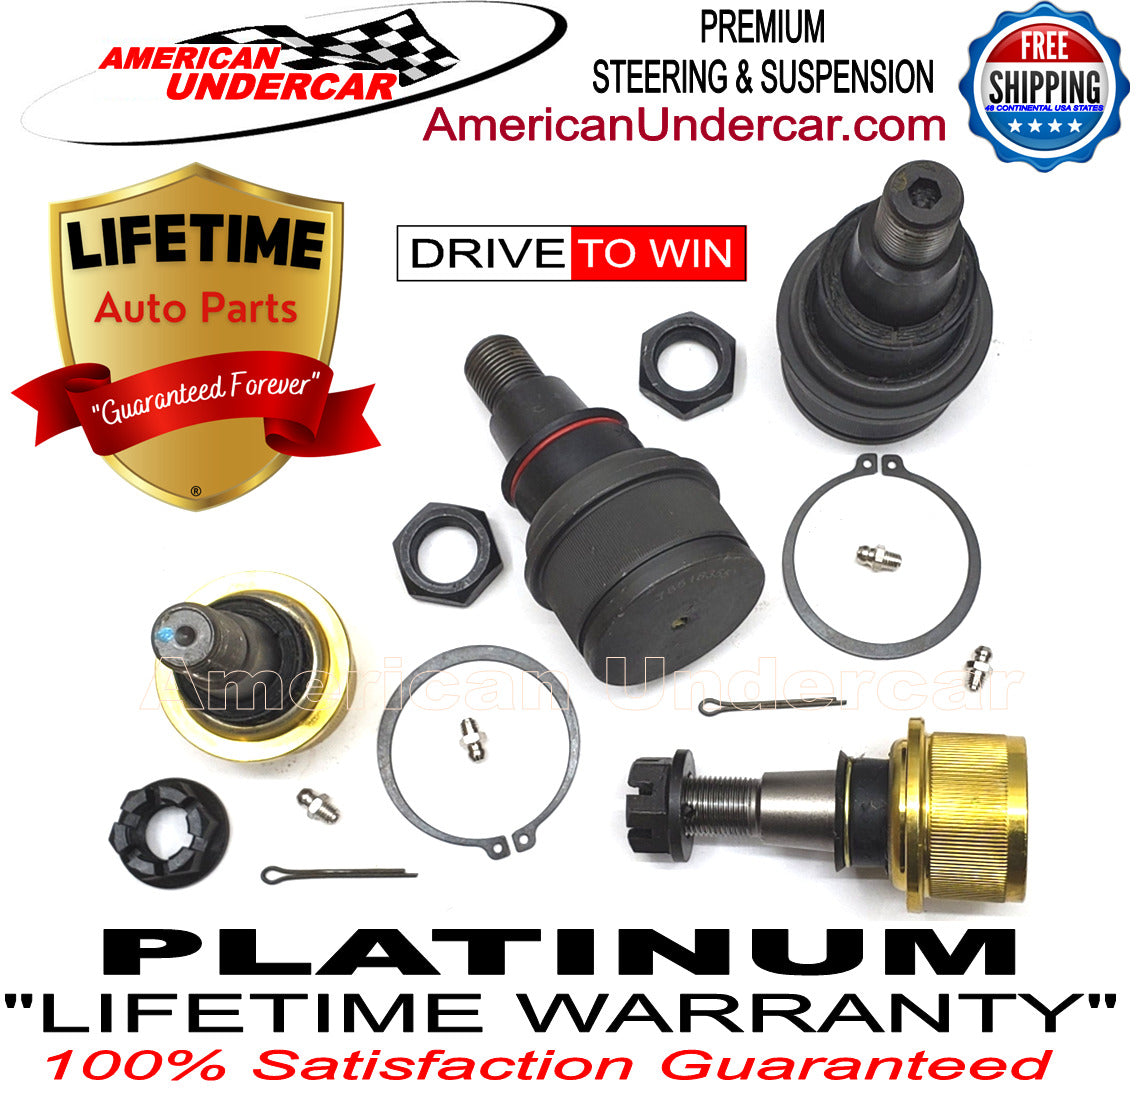 Lifetime Ball Joint Steering Suspension Kit for 2005-2010 Ford F450 Super Duty 4x4